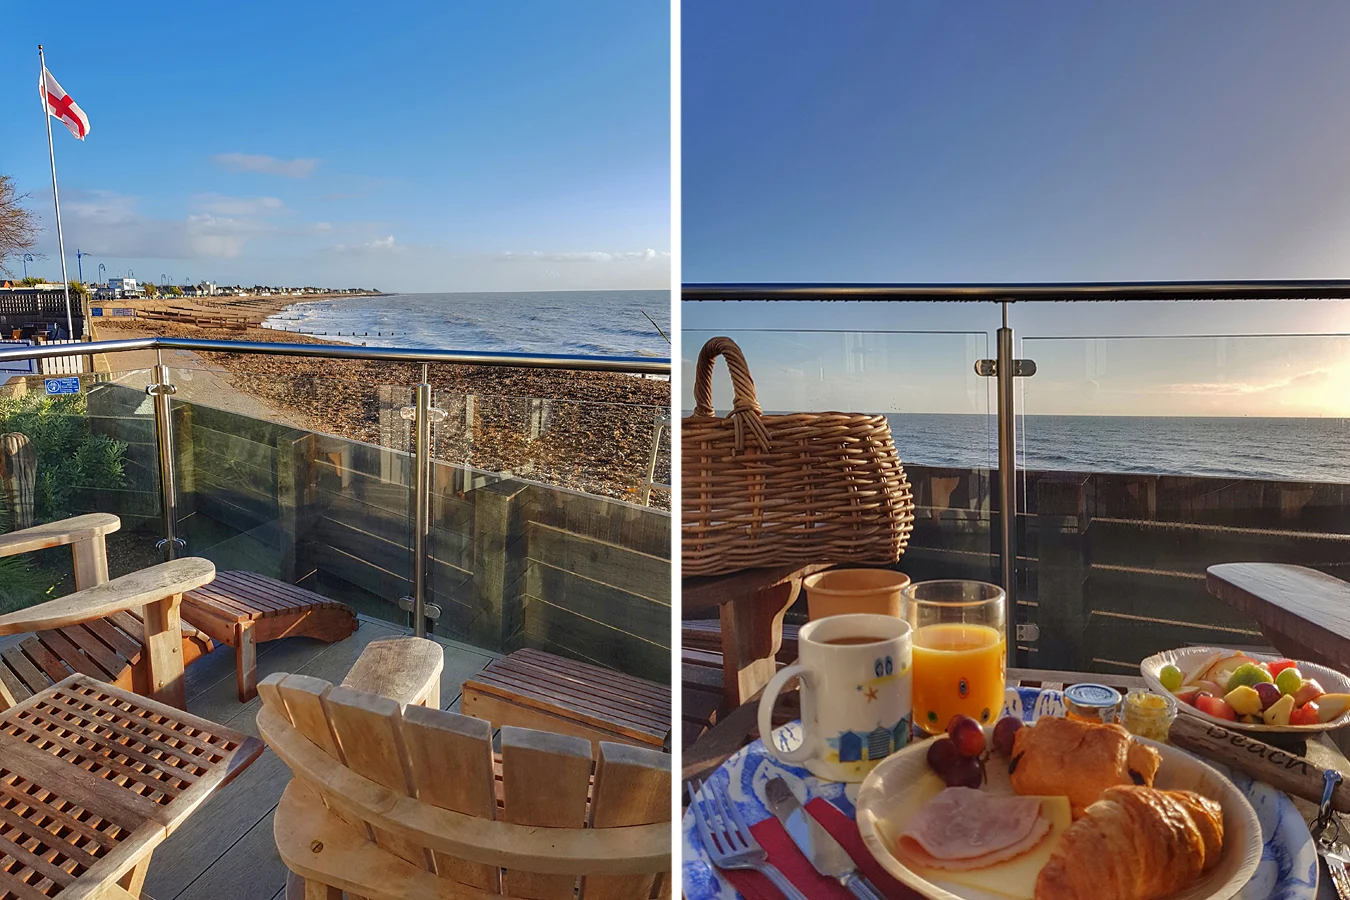 Breakfast by the sea at the Beach Huts, West Sussex